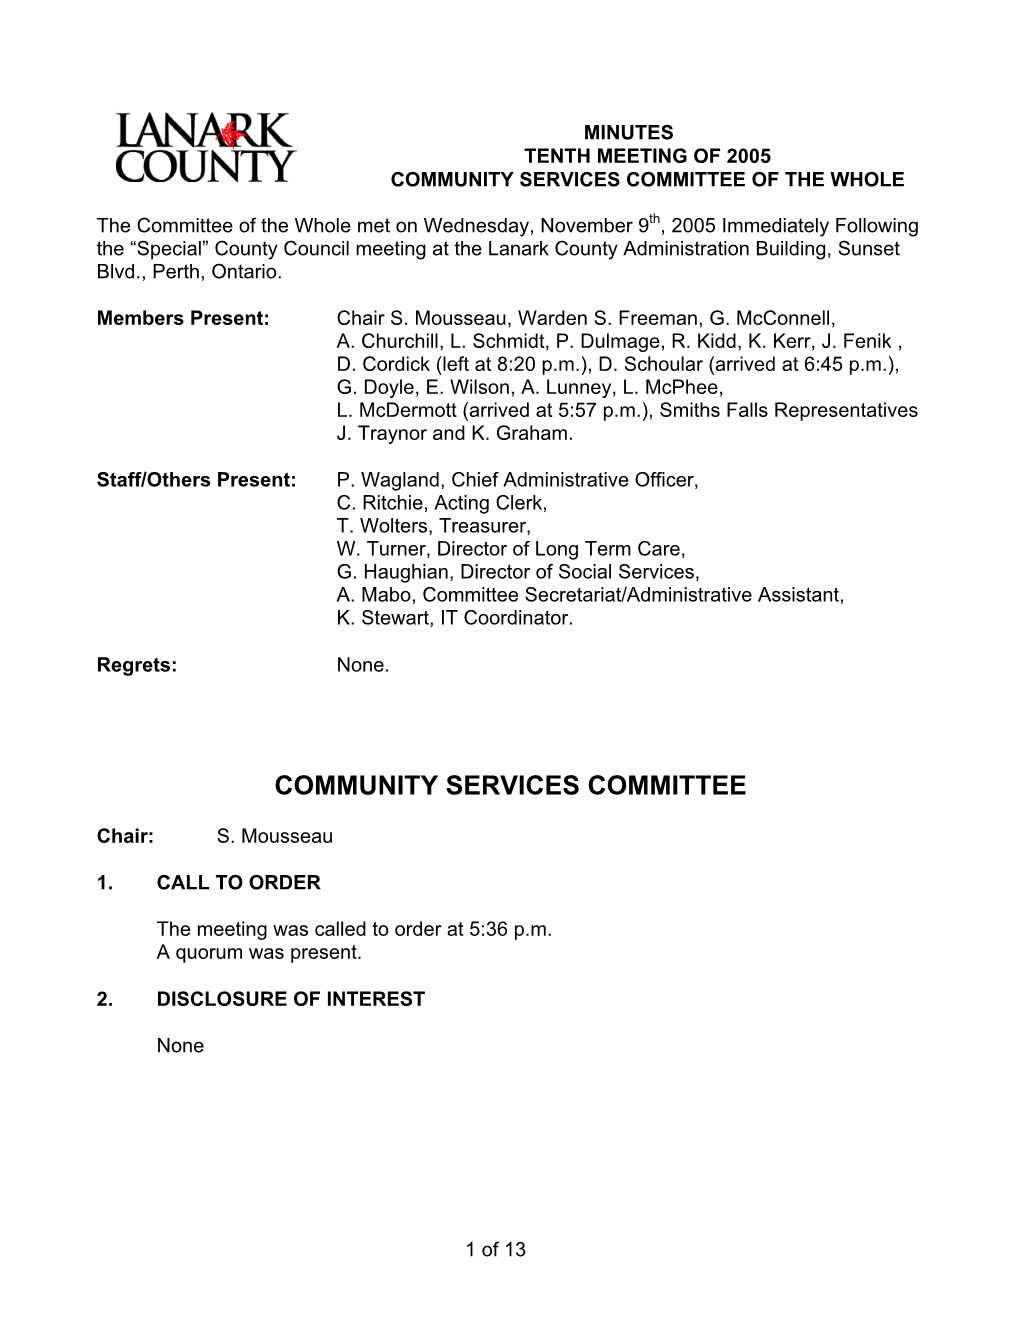 Community Services Committee of the Whole